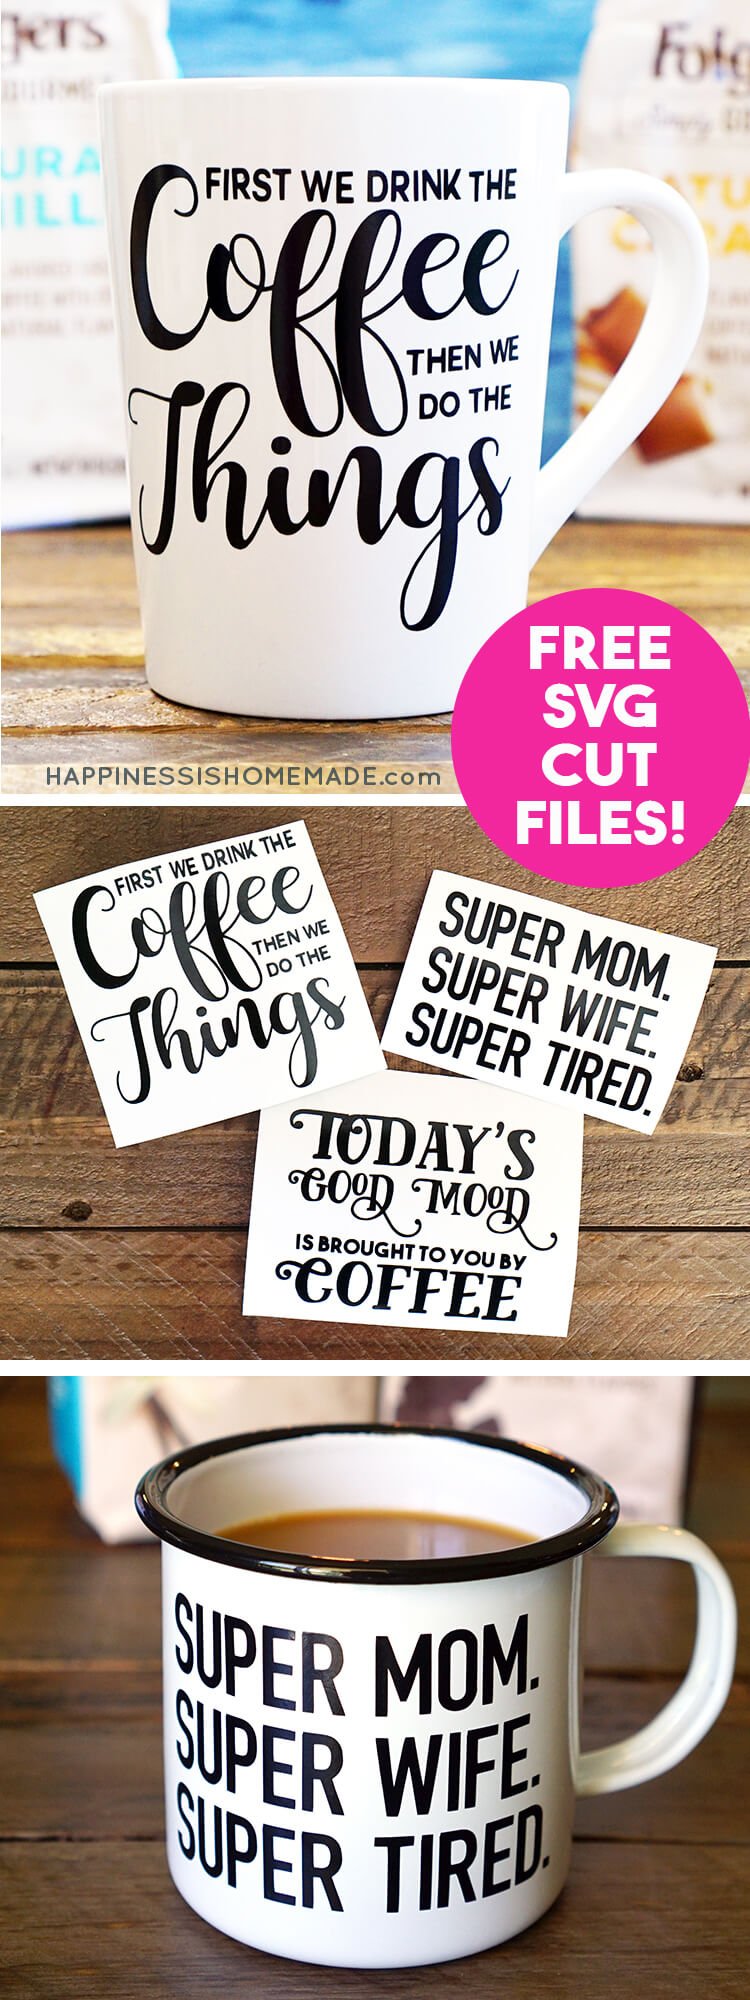 free svg cut files for your coffee mug